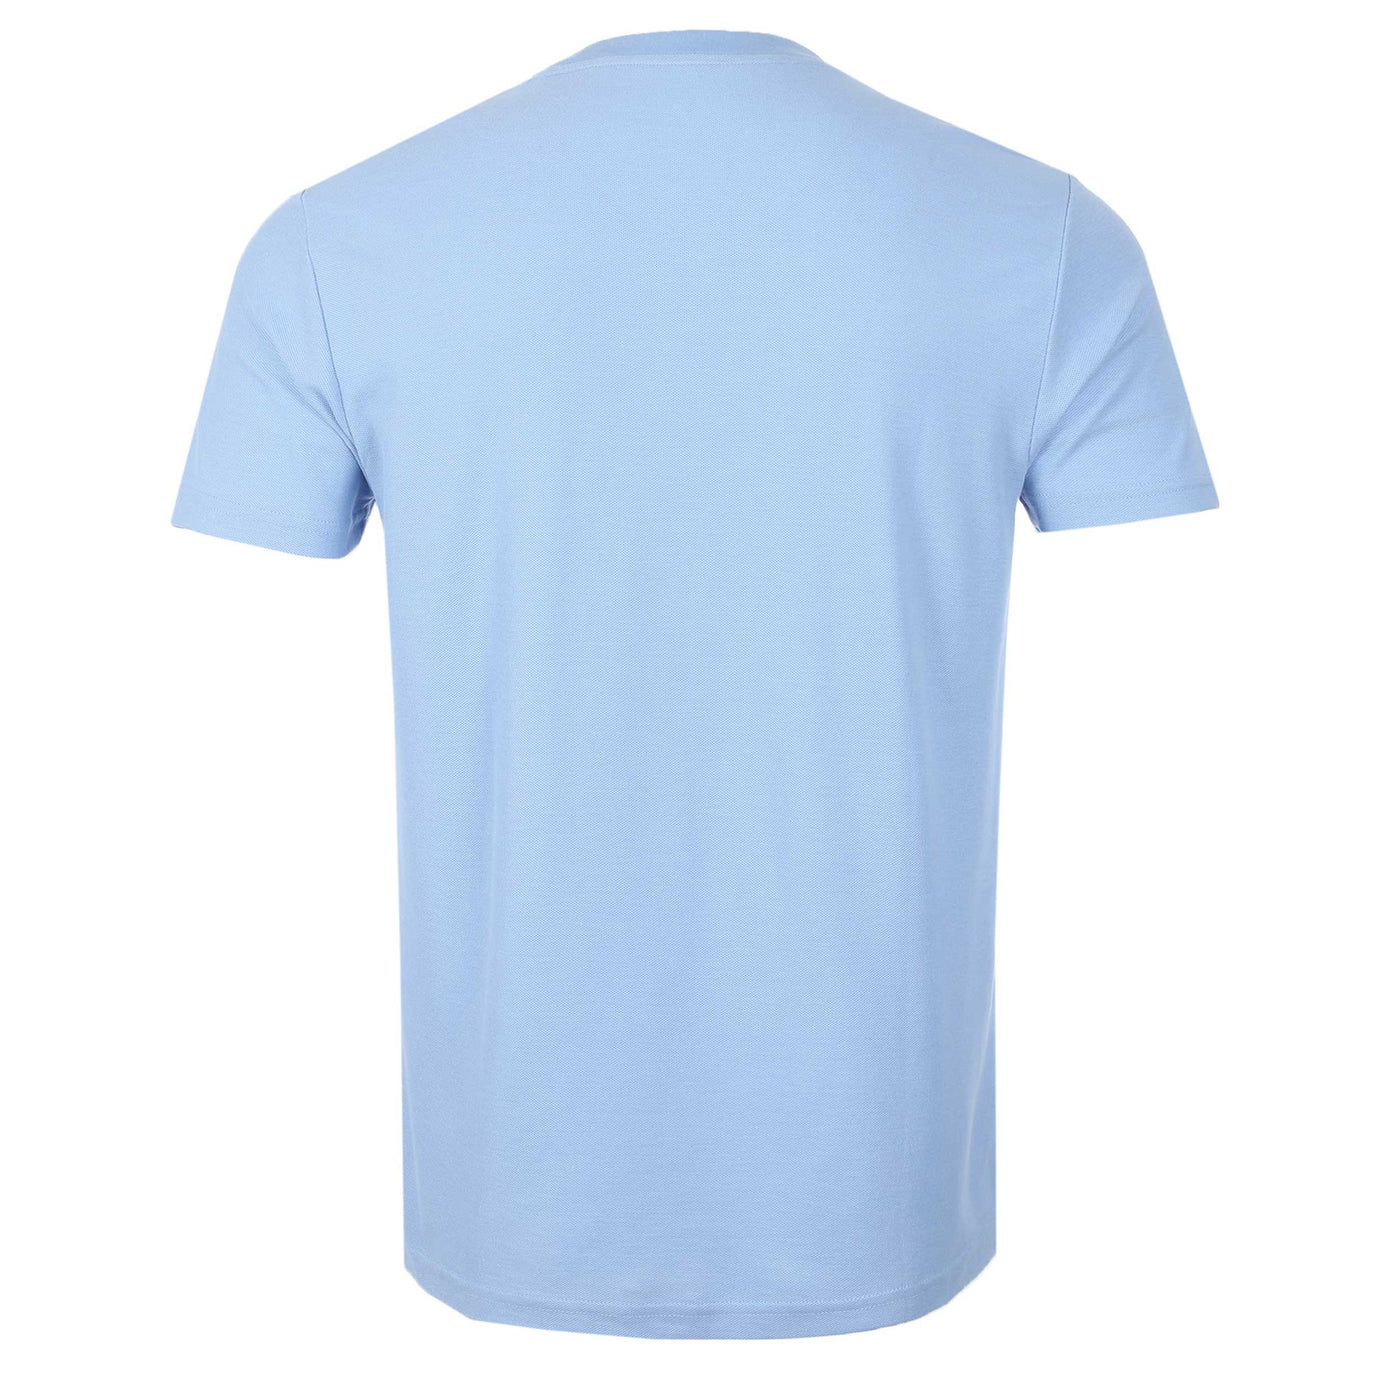 Psycho Bunny Stanford Pique T-Shirt in Serenity Sky Blue Back